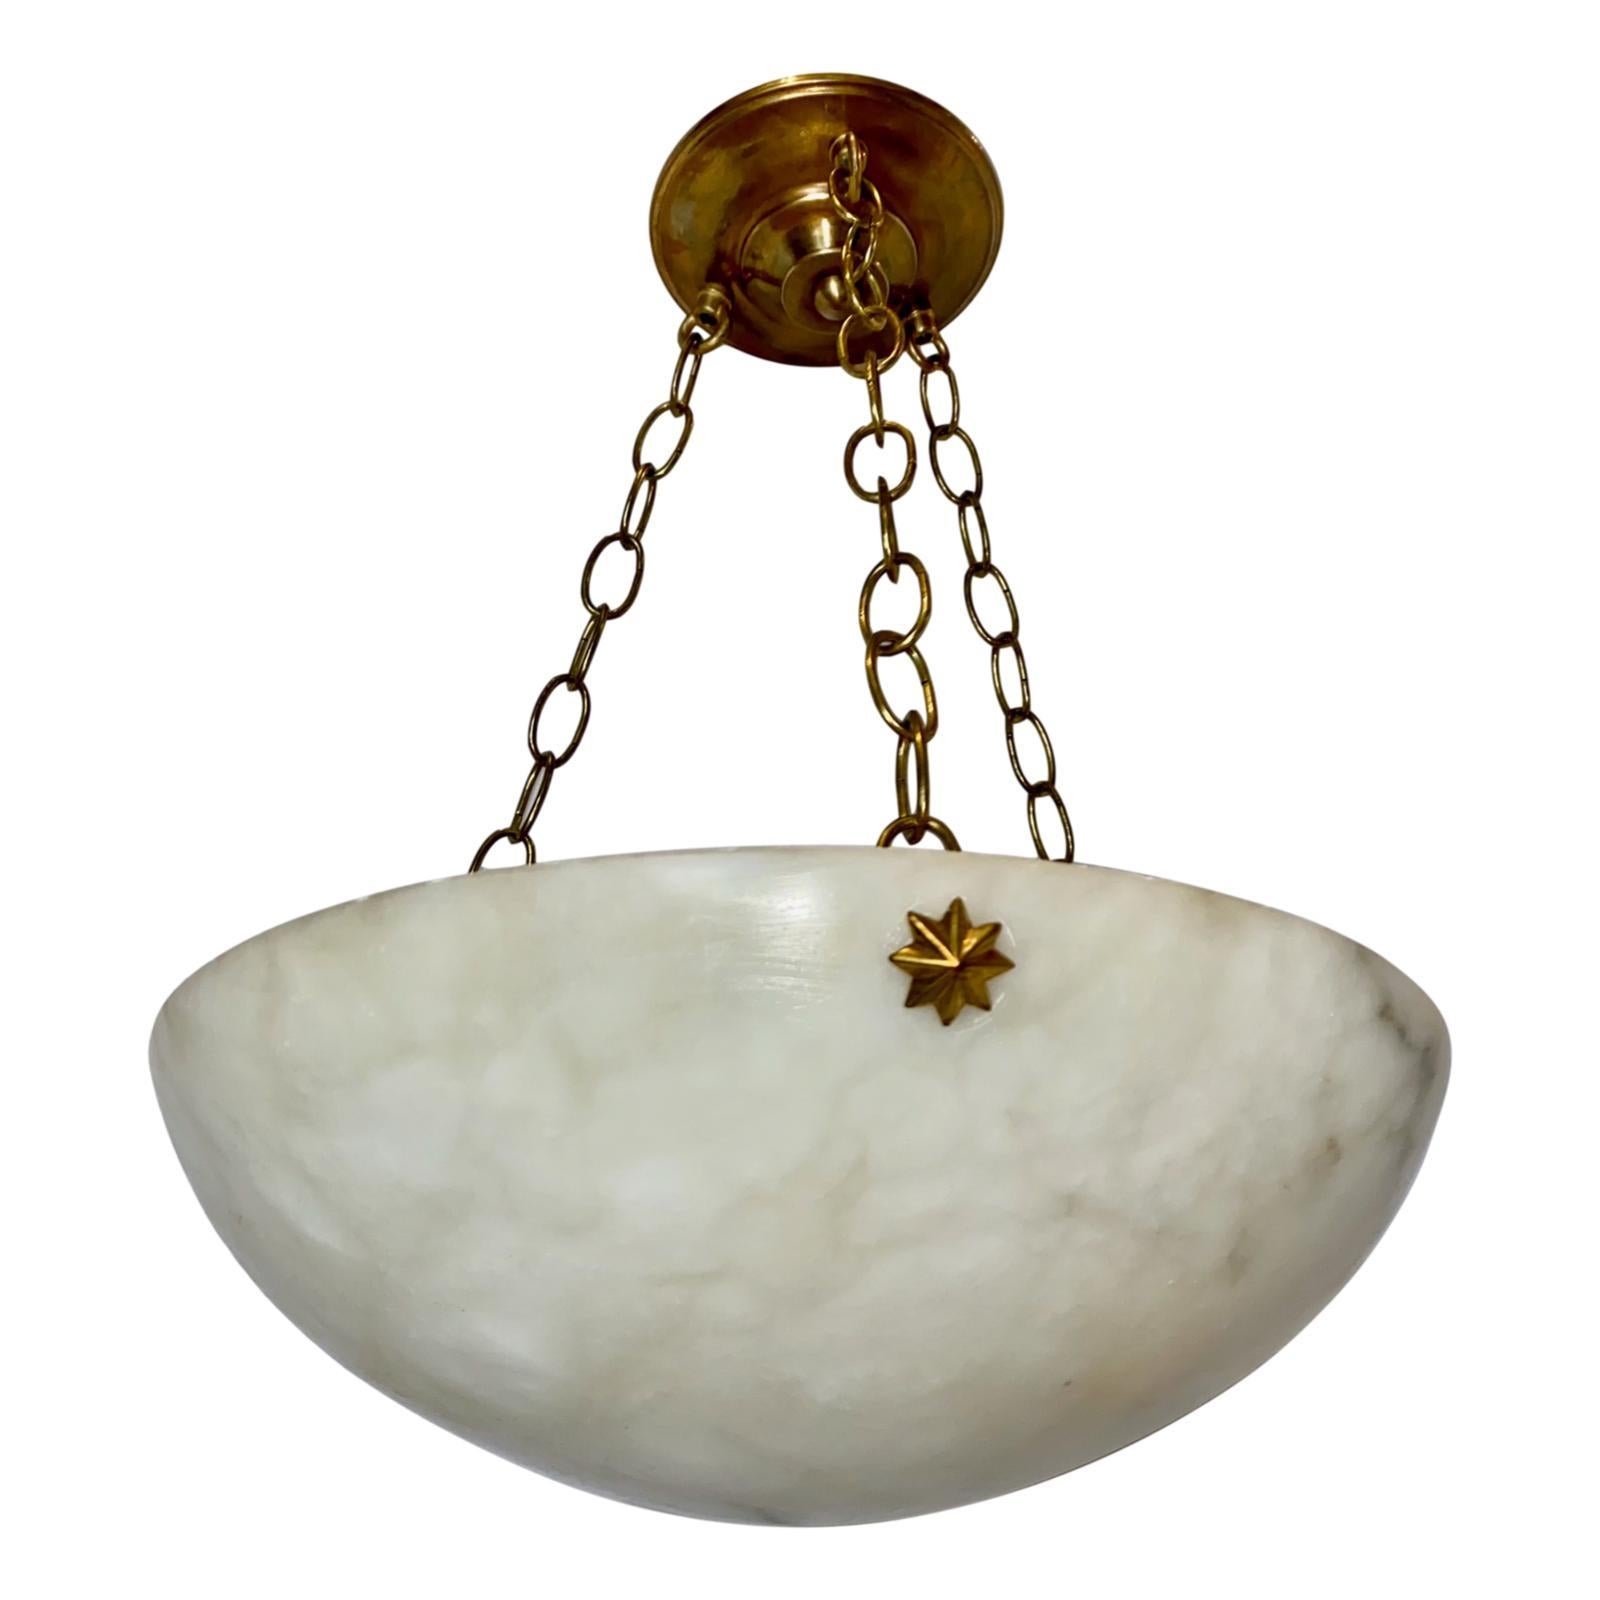 A circa 1920s French carved alabaster fixture with three interior lights.

Measurements:
Diameter 14